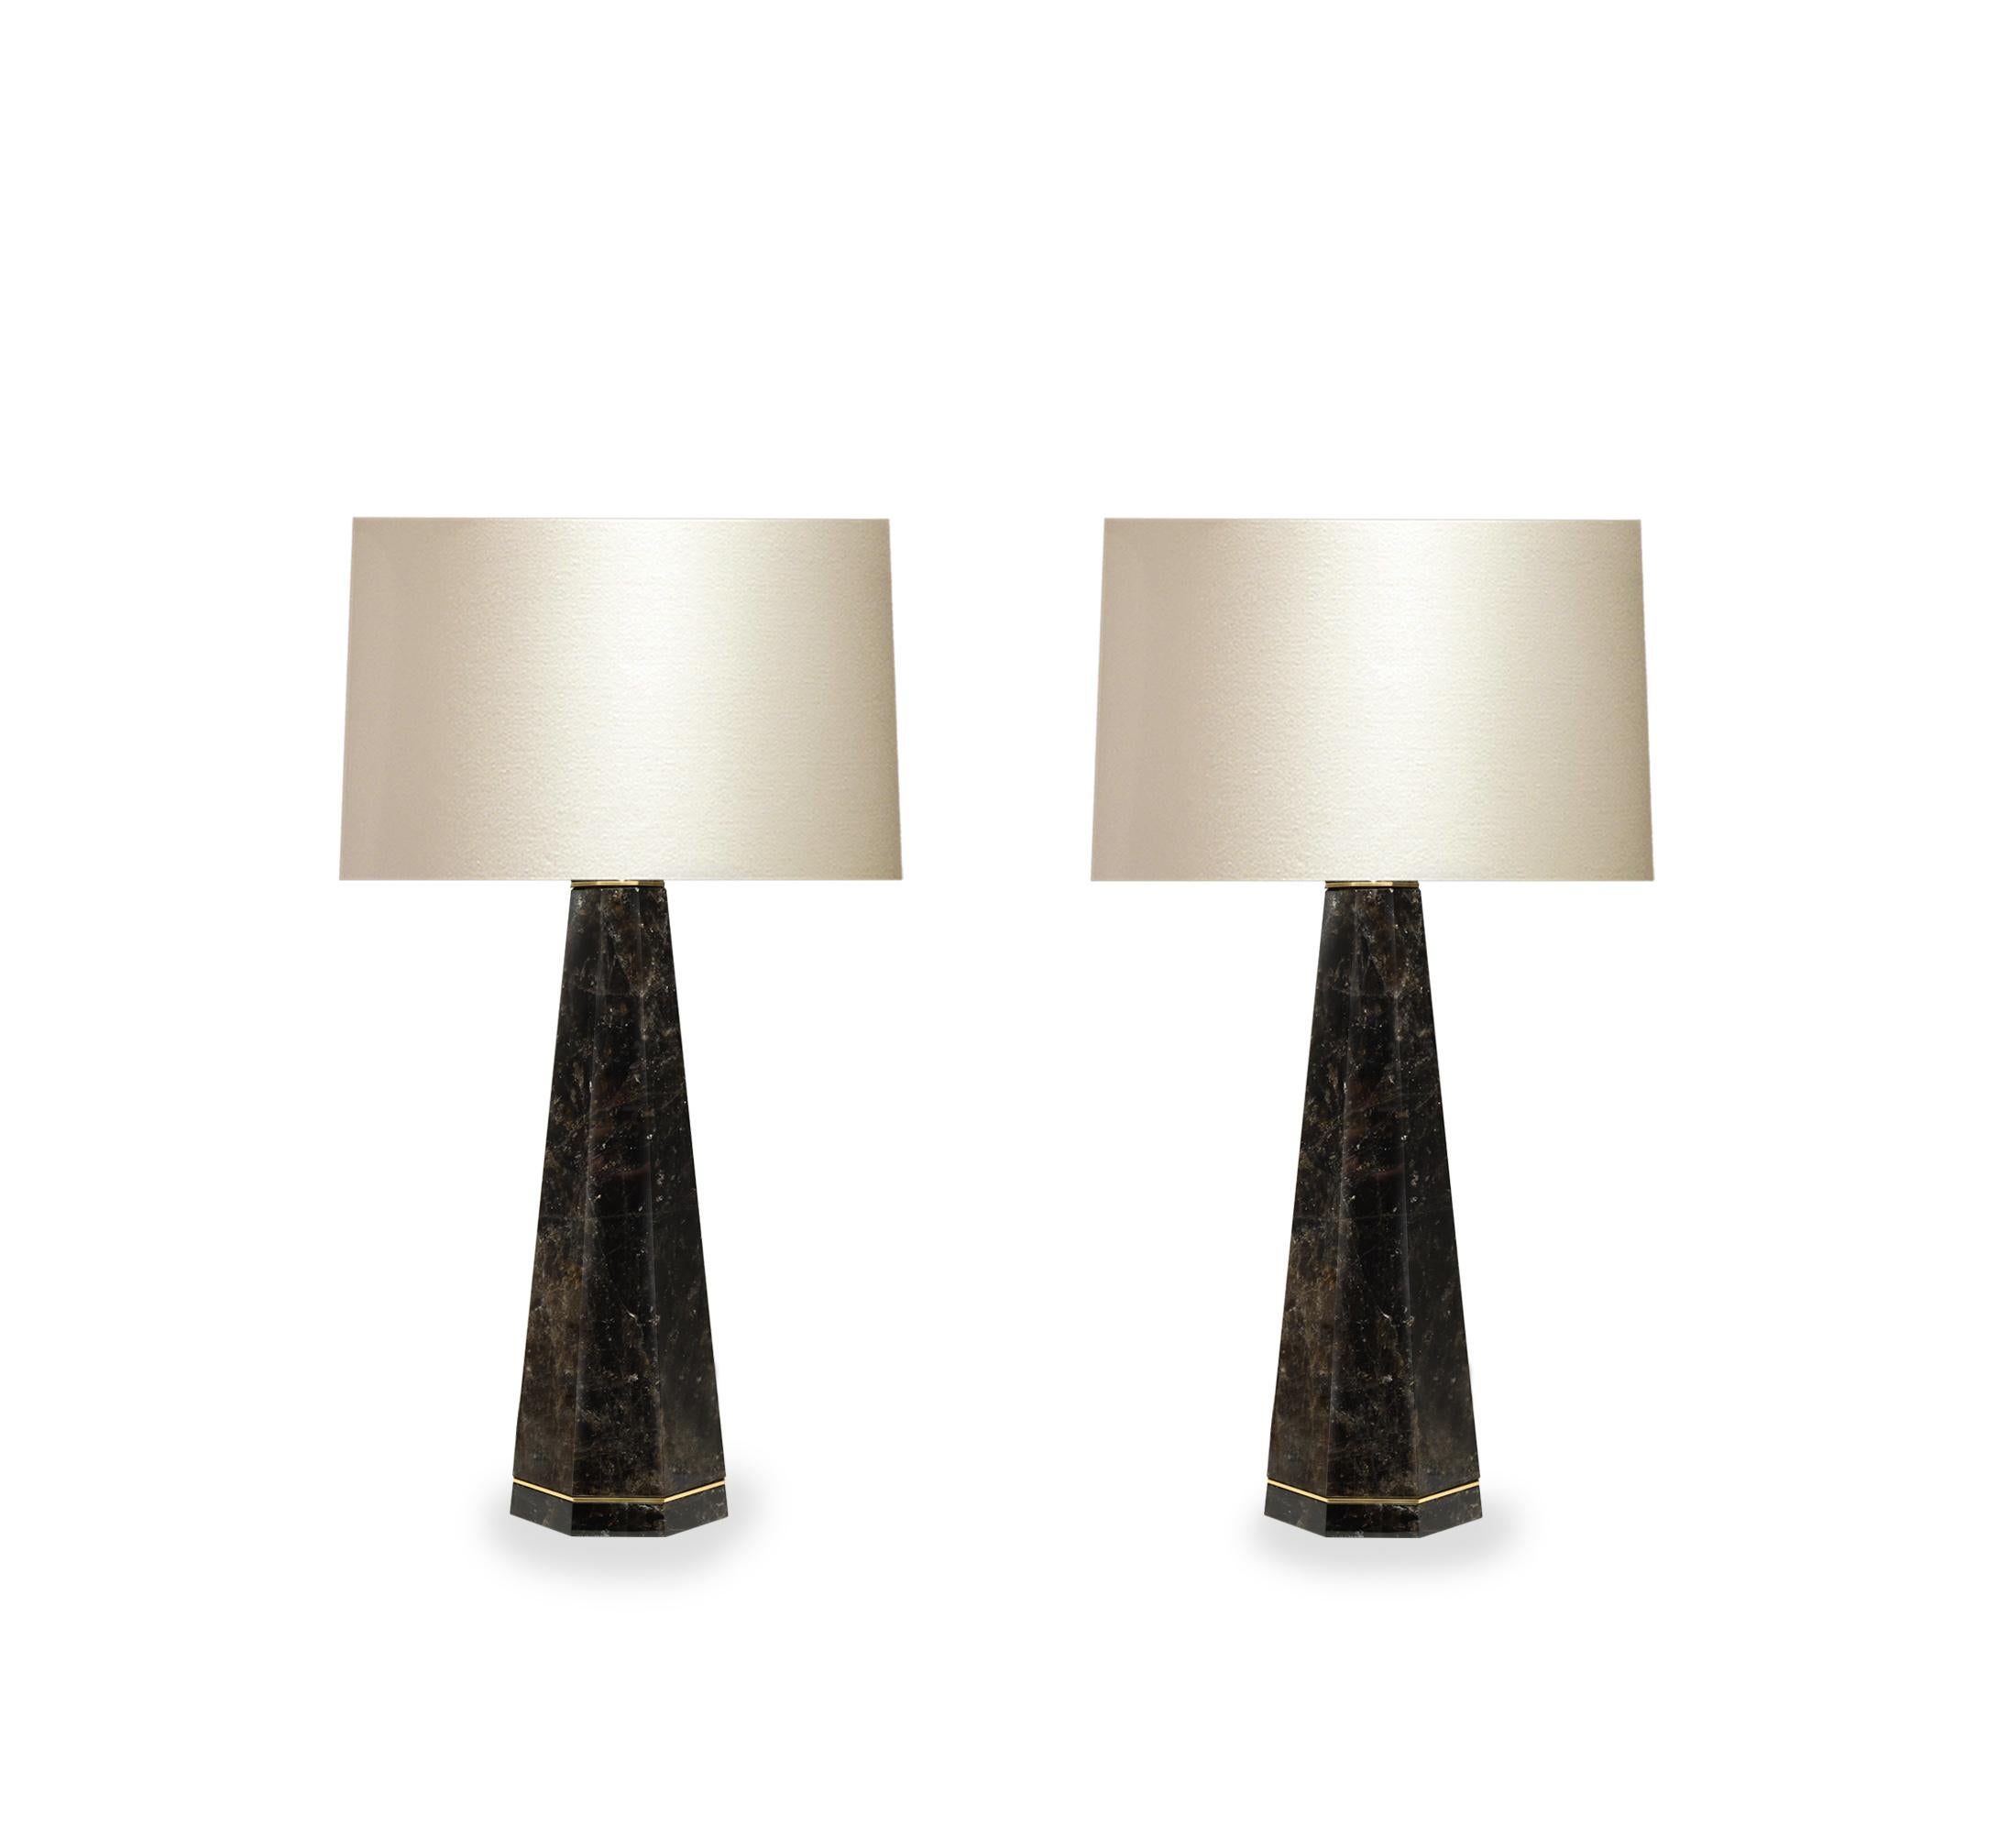 Pair of column smoky rock crystal quartz lamps with polished brass decoration. Created by Phoenix Gallery, NYC.
Measure: To the top of rock crystal 19.5